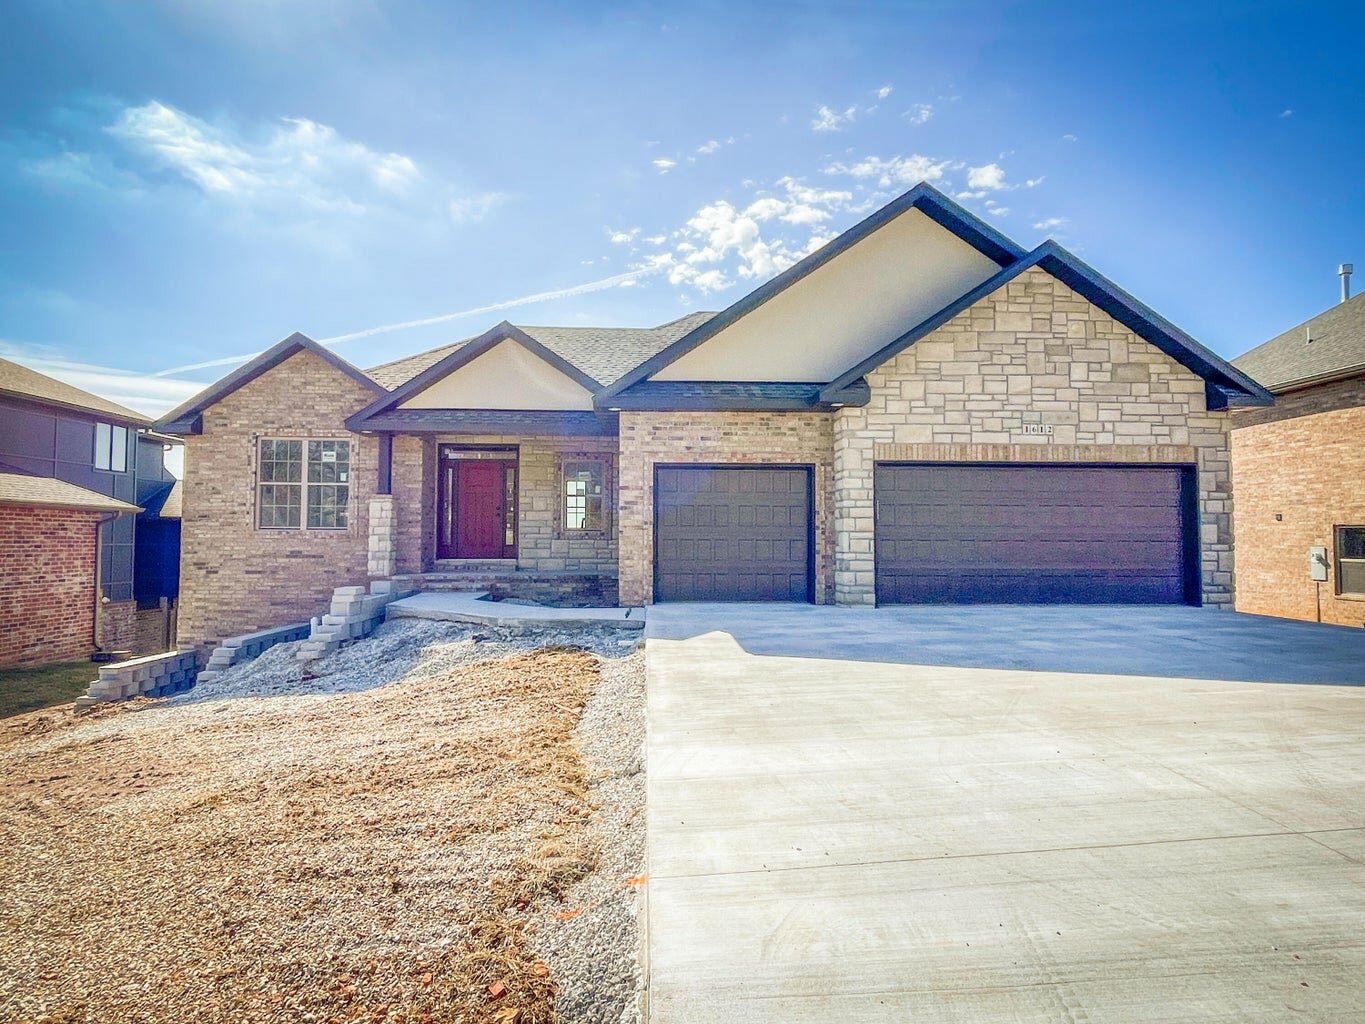 1672 Silver Oak Drive
$674,900
Bedrooms: 5
Bathrooms: 4
Listing firm: Old World Realty LLC